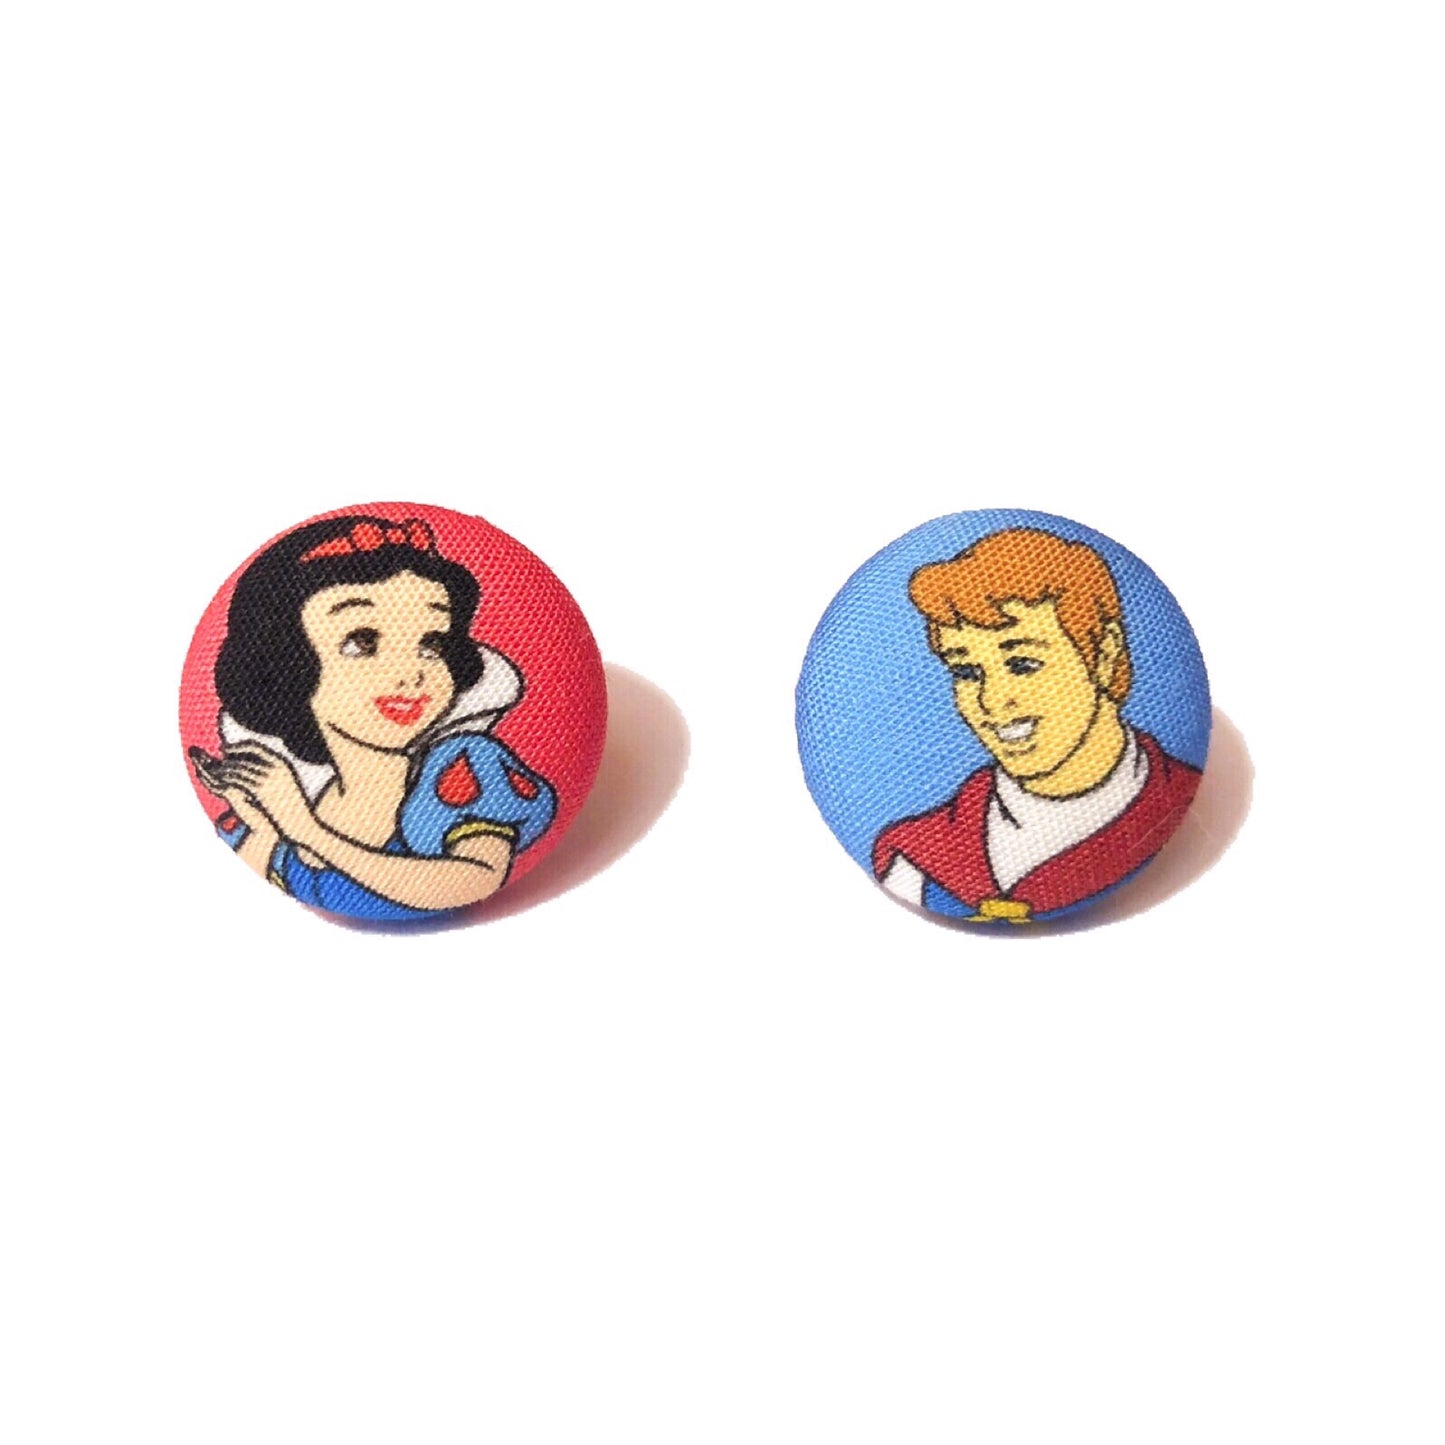 Snow & Prince Fabric Button Earrings